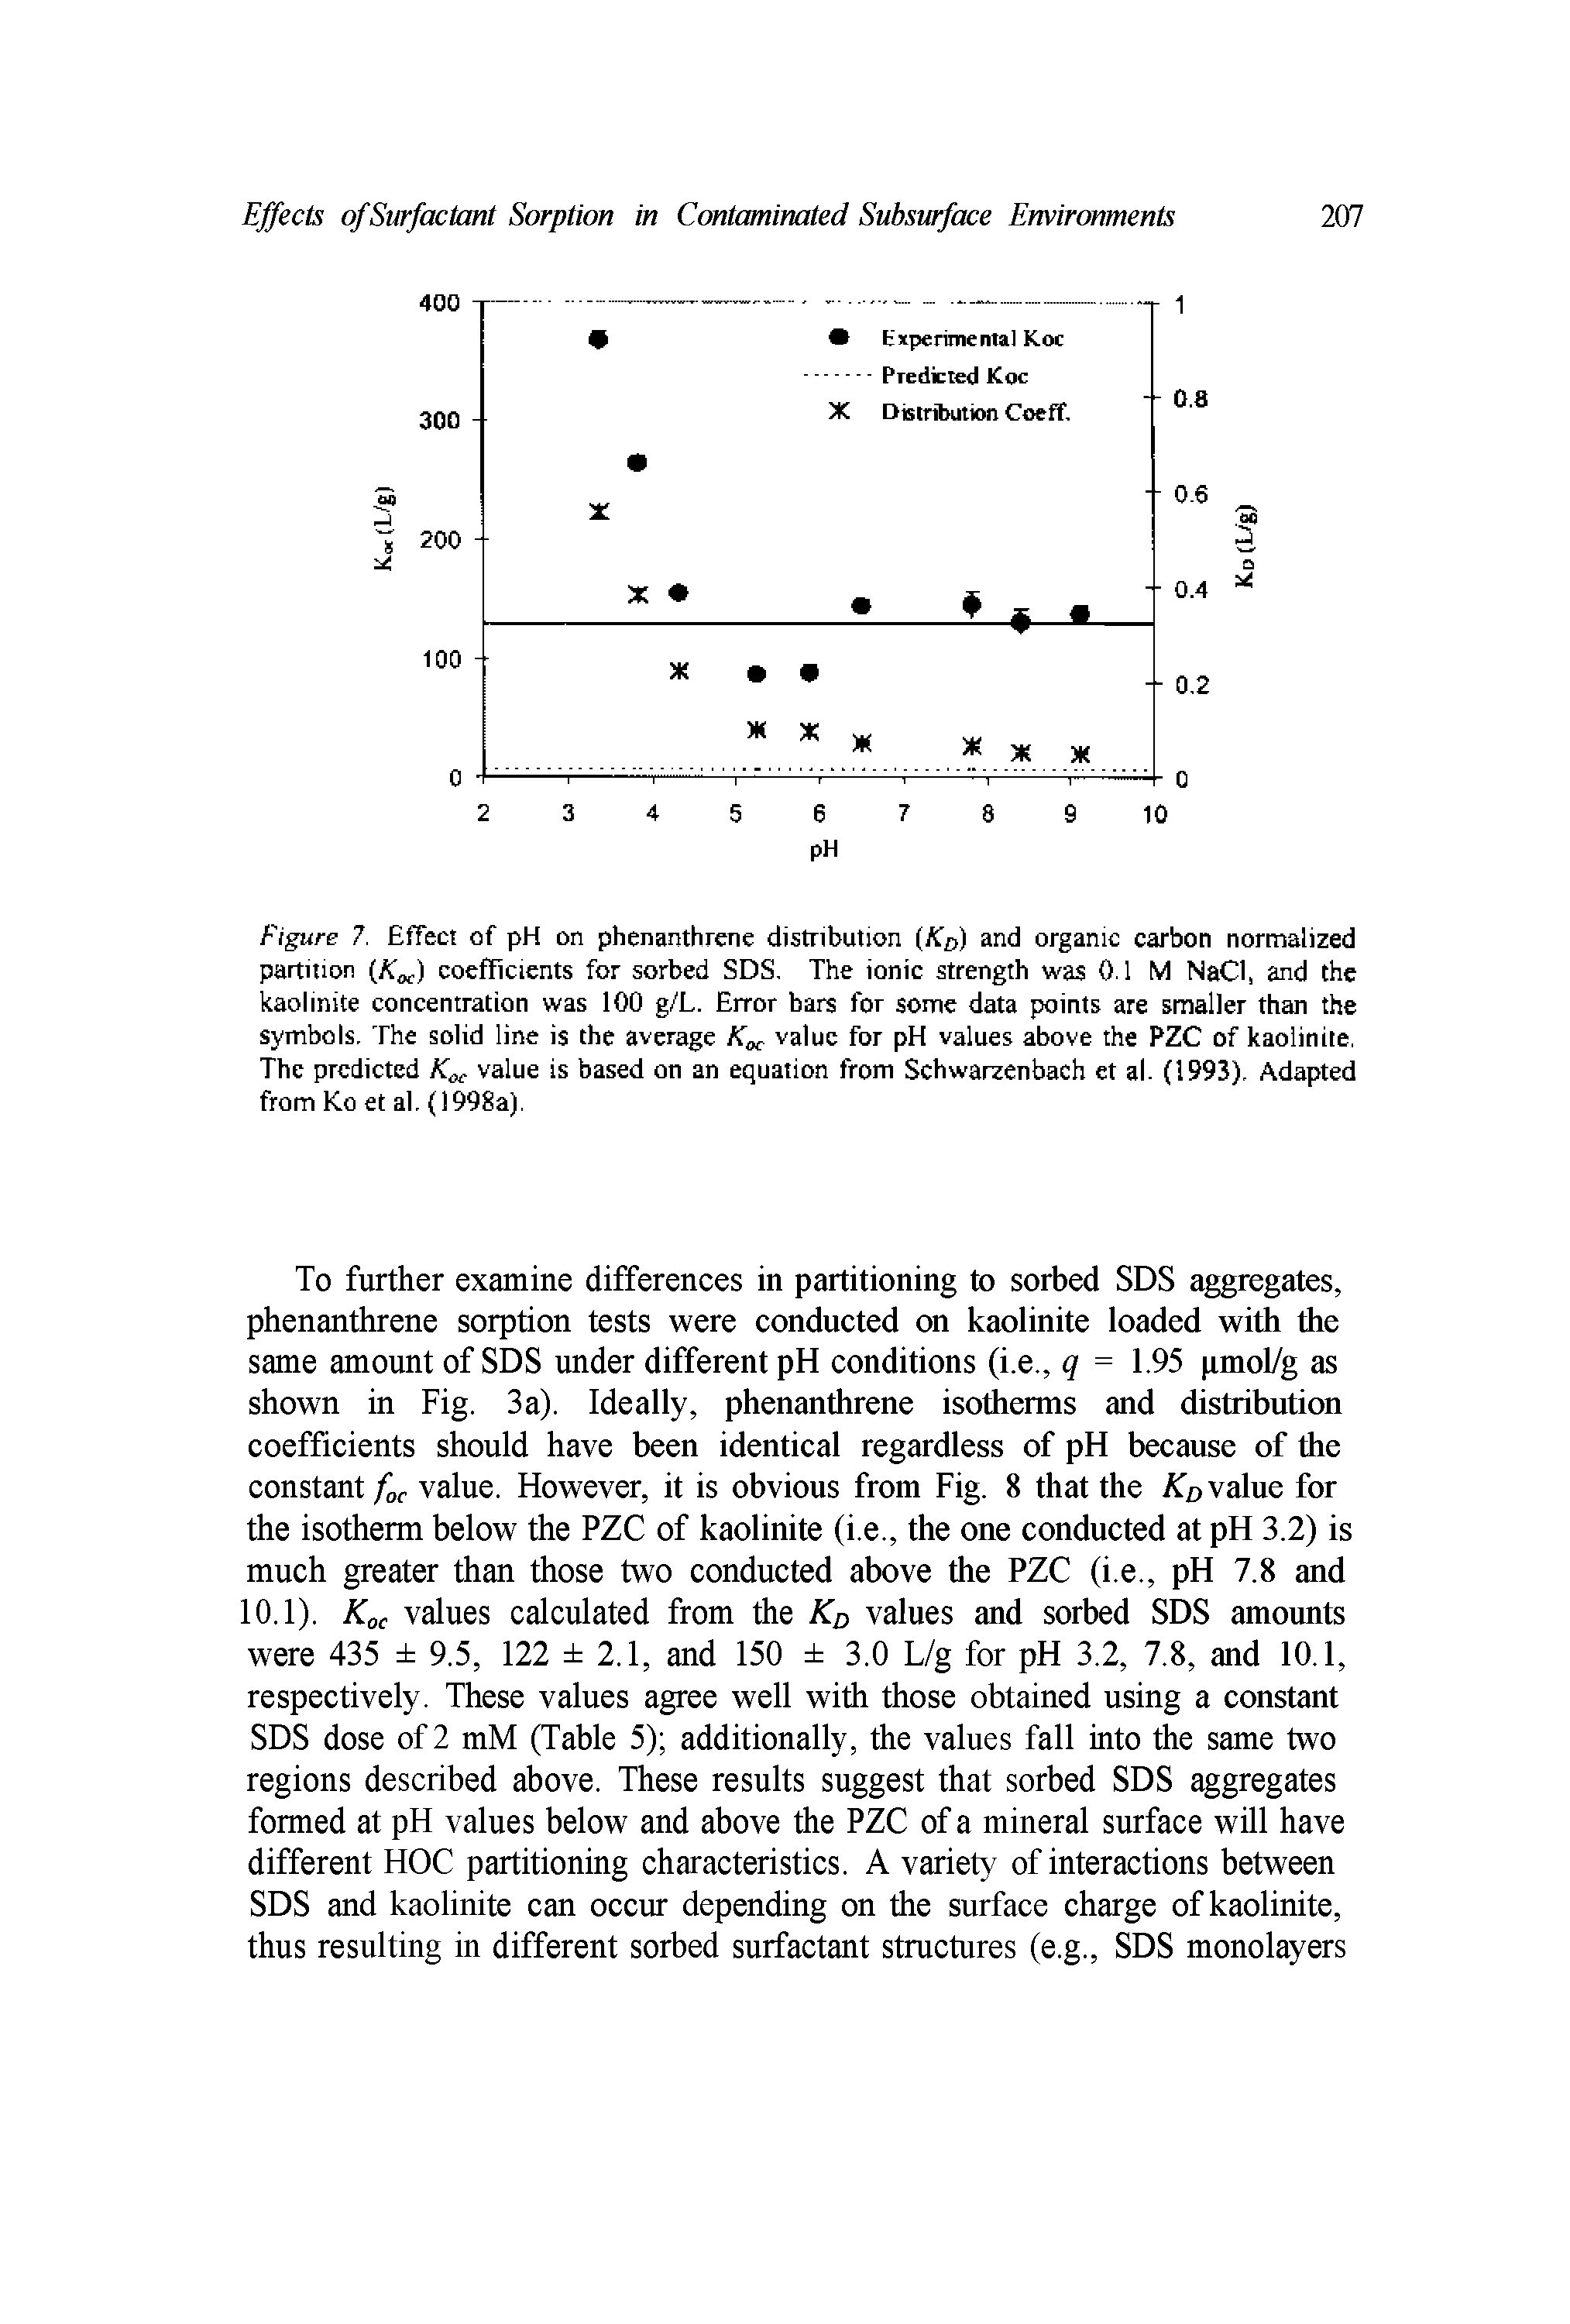 Figure 7. Effect of pH on phenanthrene distribution (A. 0) and organic carbon normalized partition (/ ) coefficients for sorbed SDS, The ionic strength was 0.1 M NaCl, and the kaolinite concentration was 100 g/L. Error bars for some data points are smaller than the symbols. The solid line is the average Kx value for pH values above the PZC of kaolinite, The predicted value is based on an equation from Schwarzenbach et al. (1993), Adapted from Ko et al. (1998a).